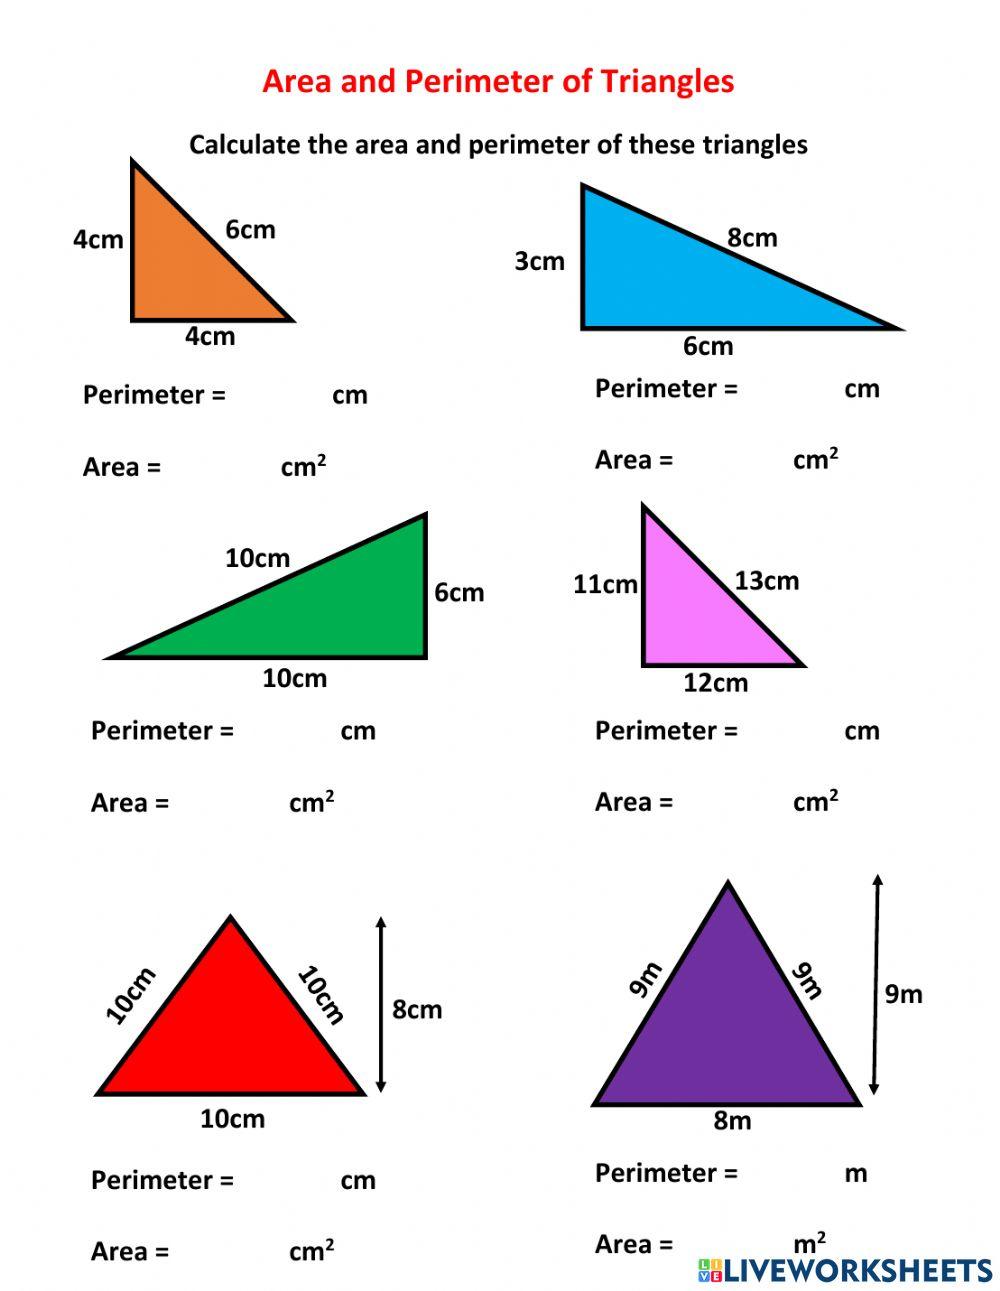 Perimeter and area of triangles